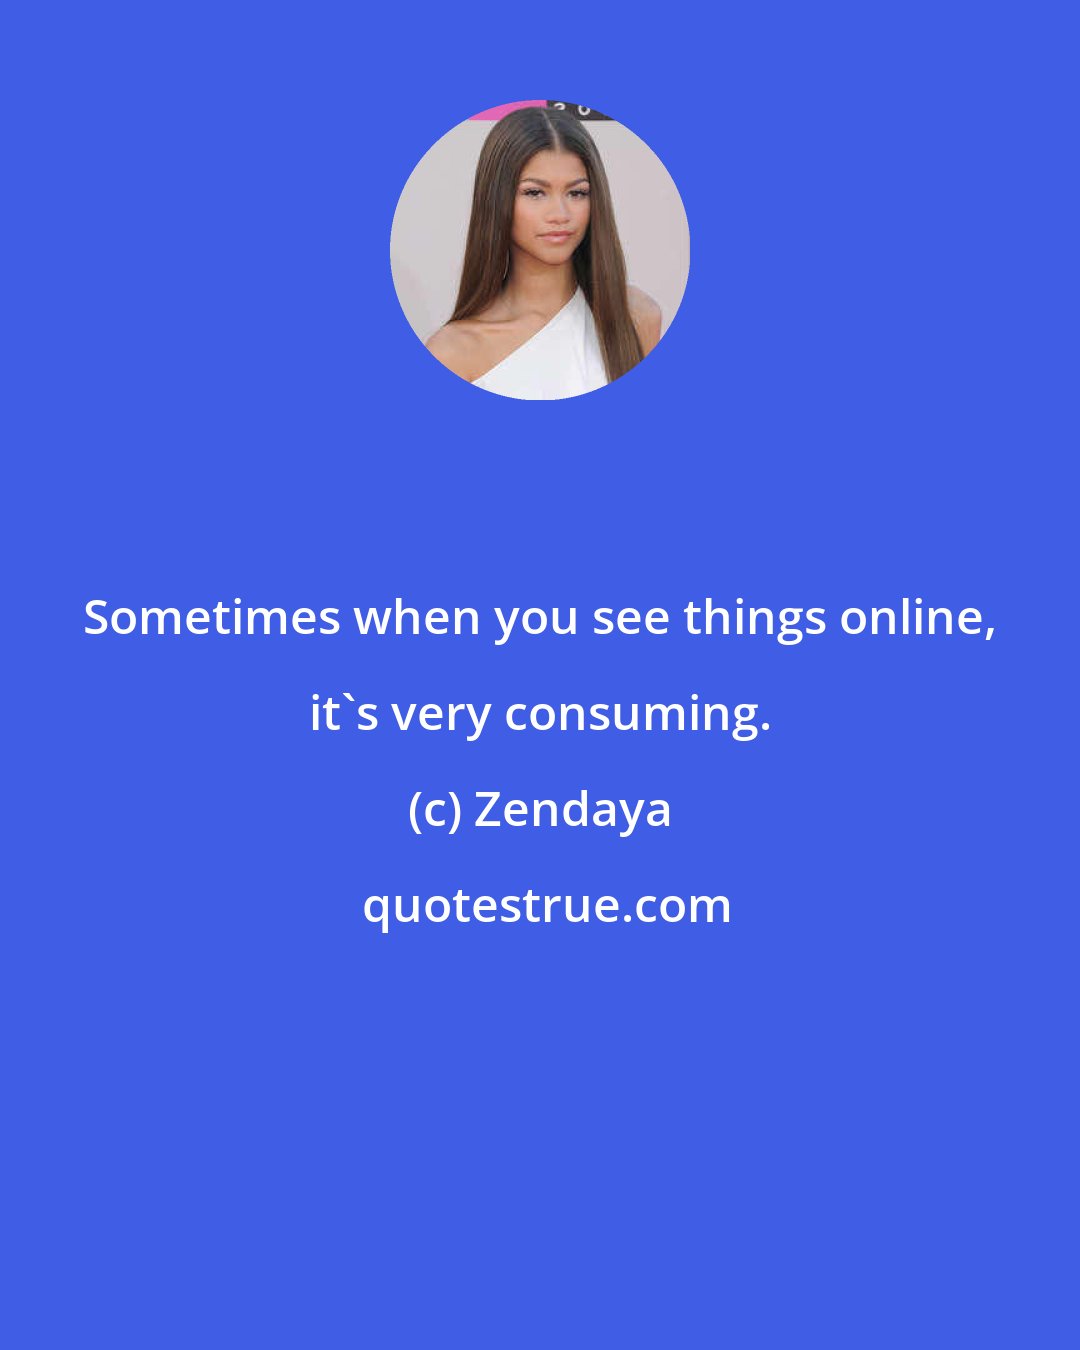 Zendaya: Sometimes when you see things online, it's very consuming.